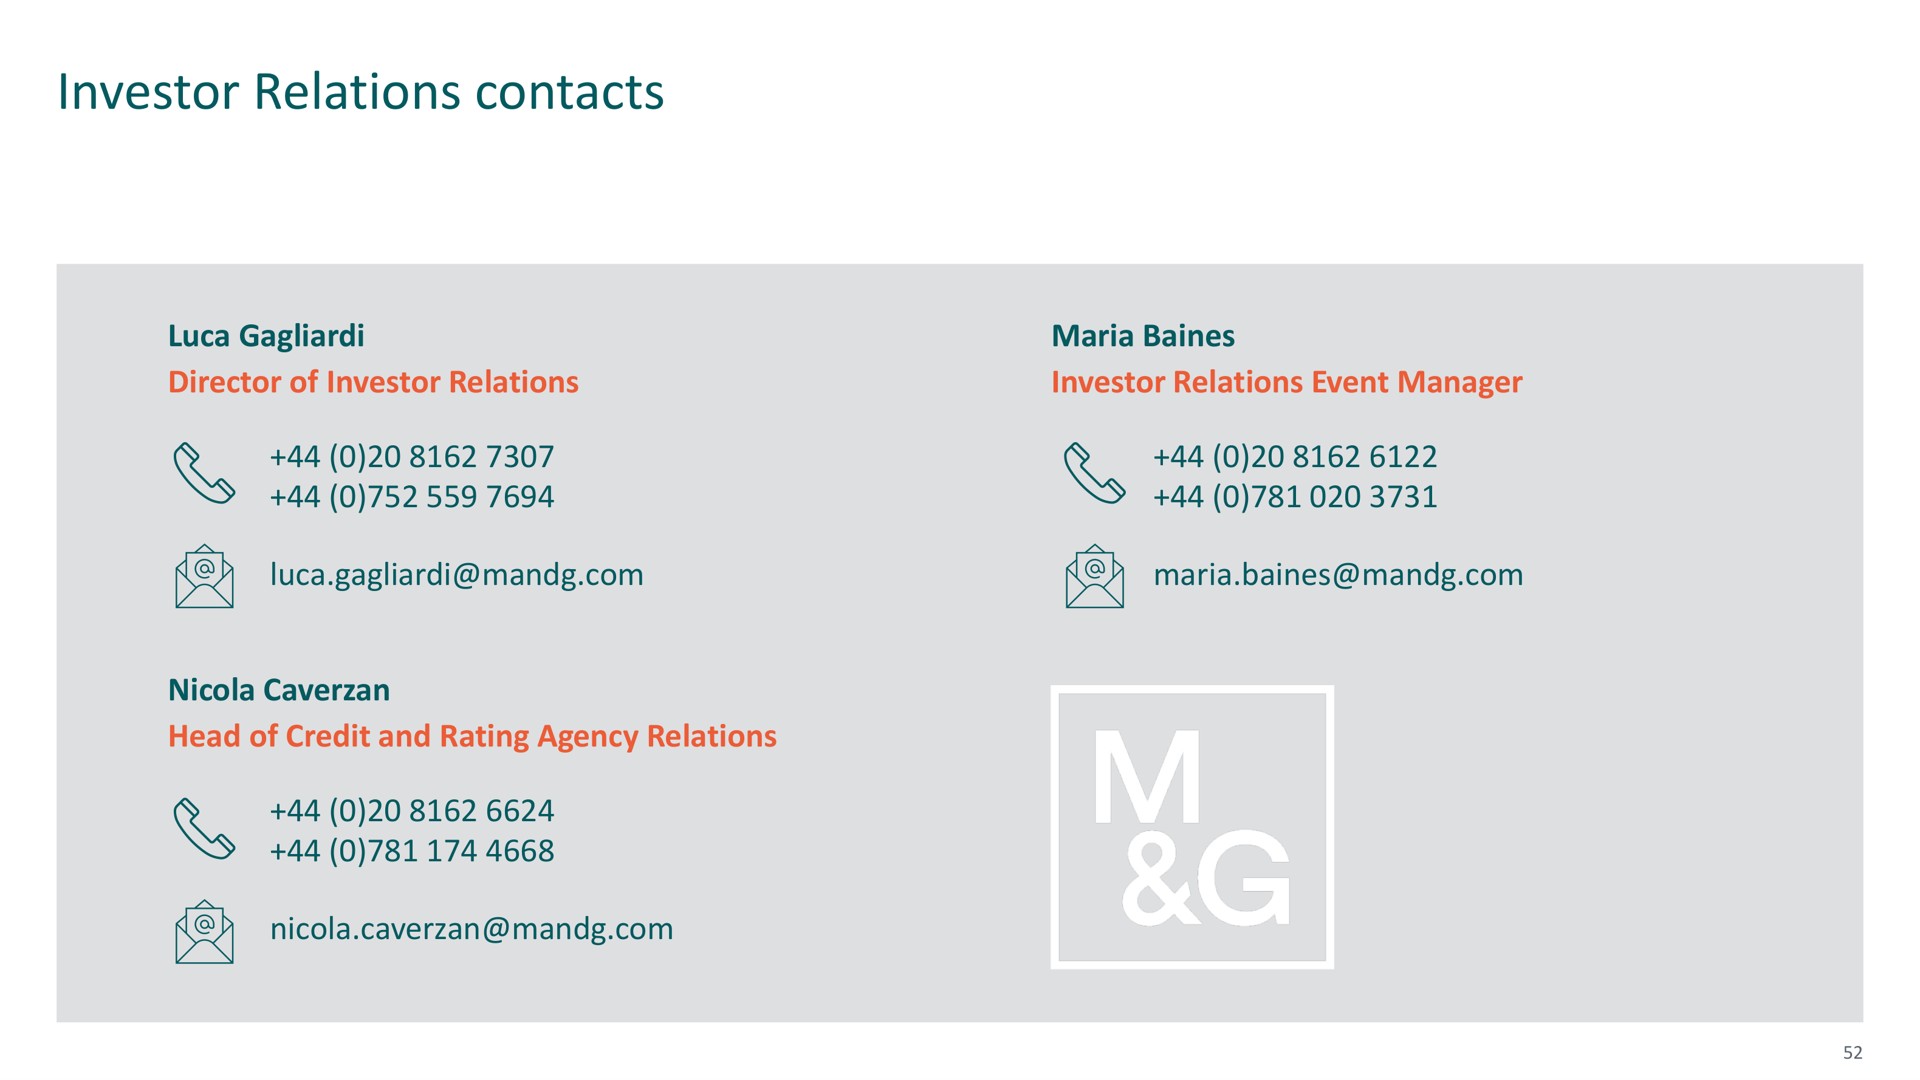 investor relations contacts | M&G